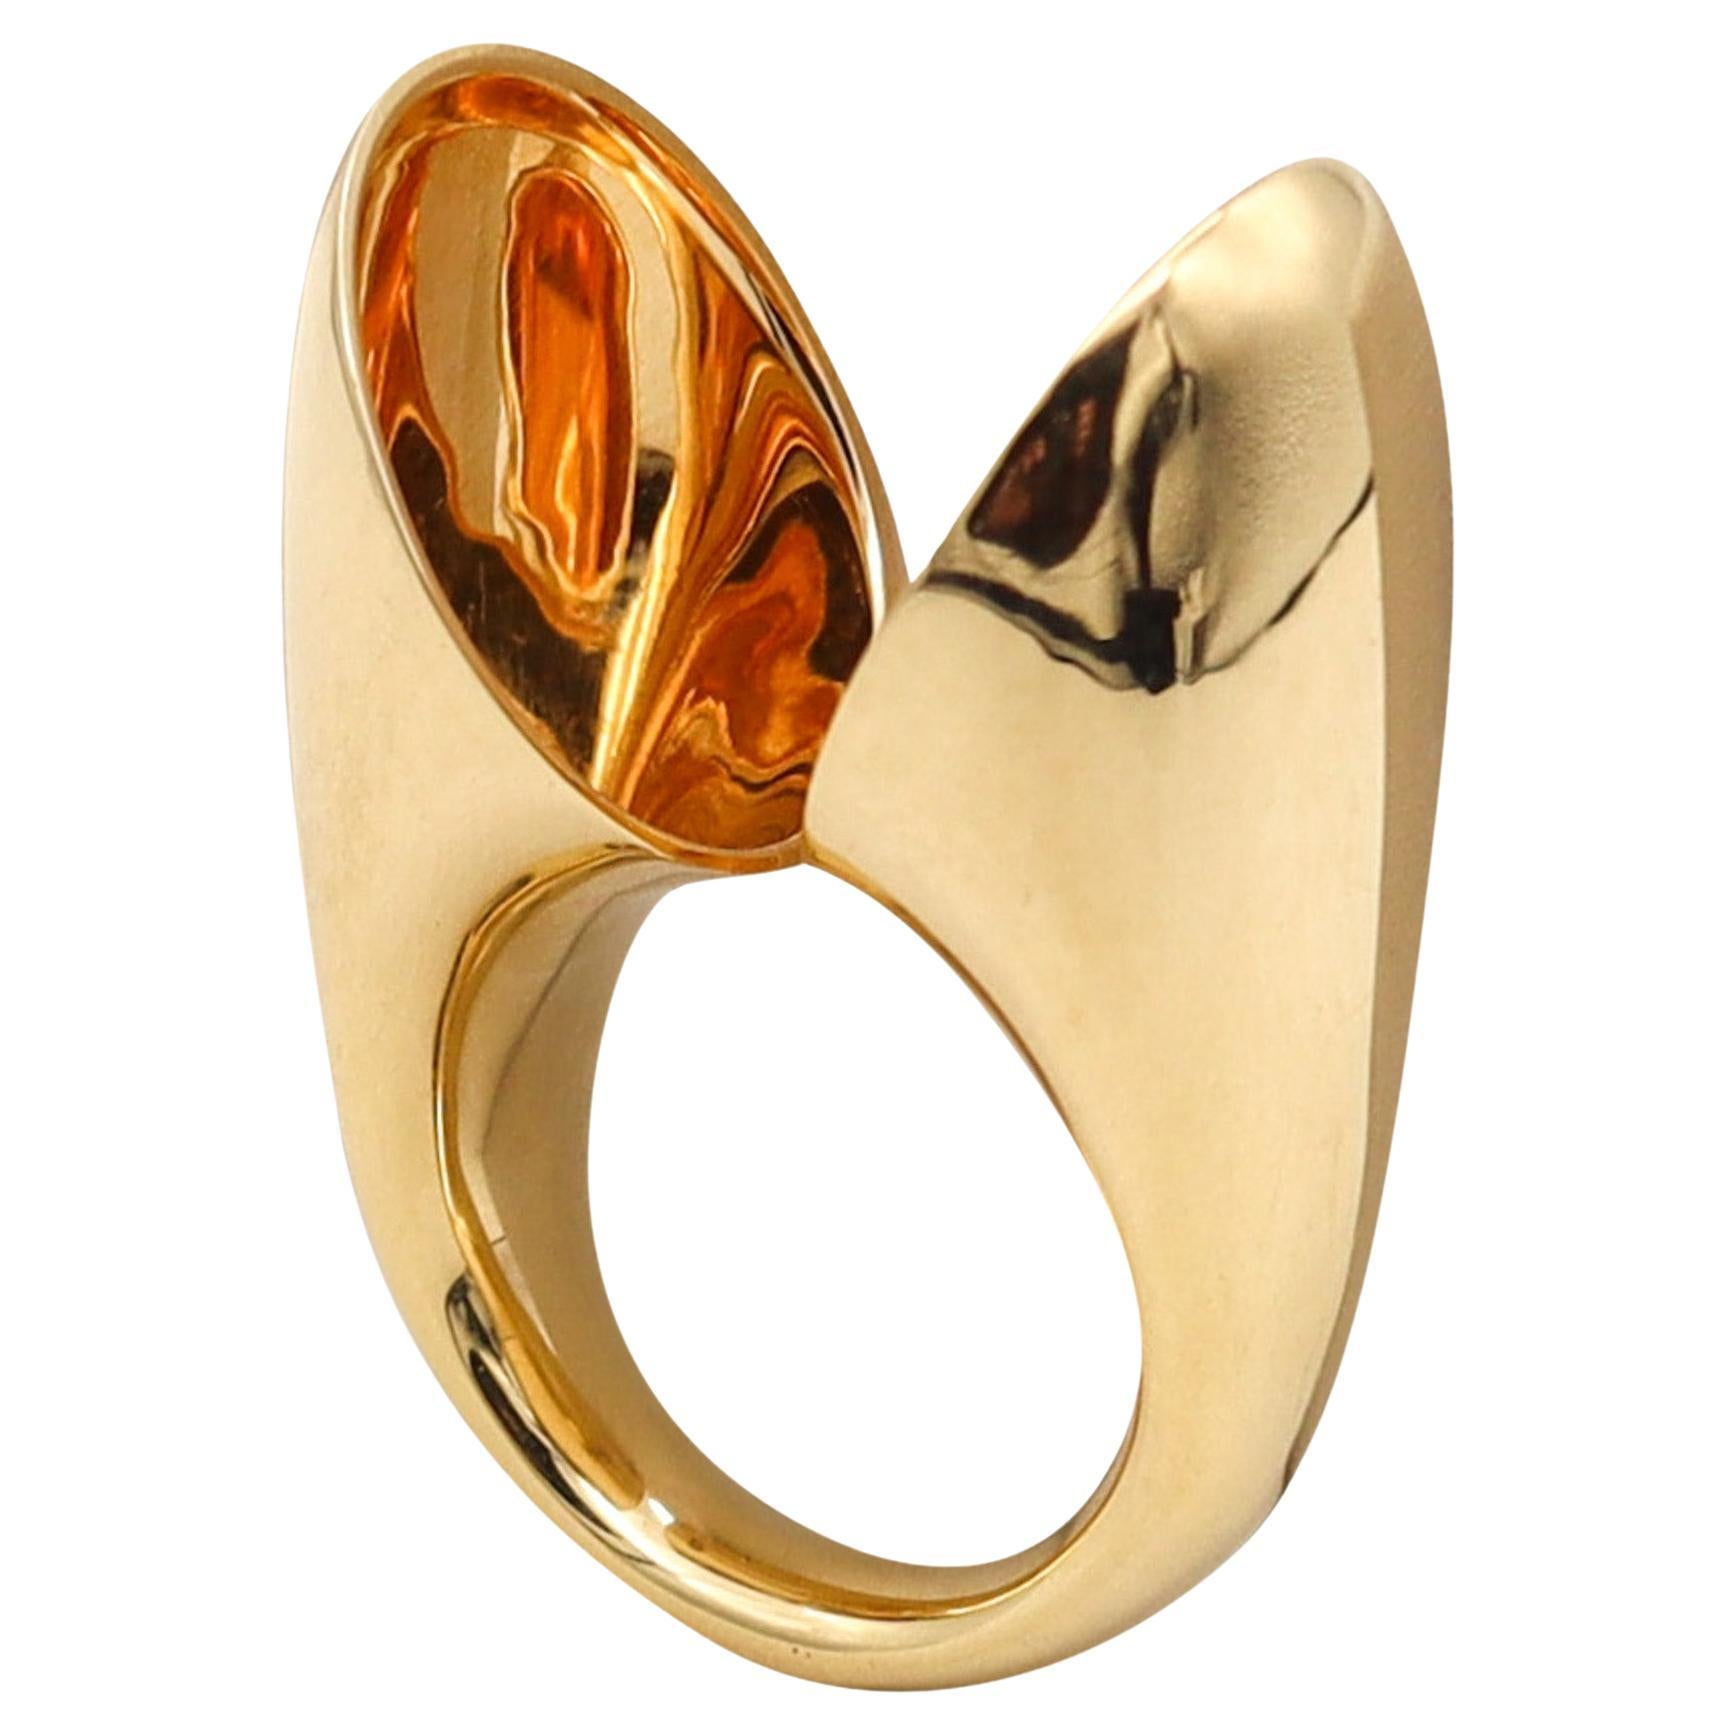 Vram Minassian Modernist Sculptural Echo Ring In Polished 18Kt Yellow Gold For Sale